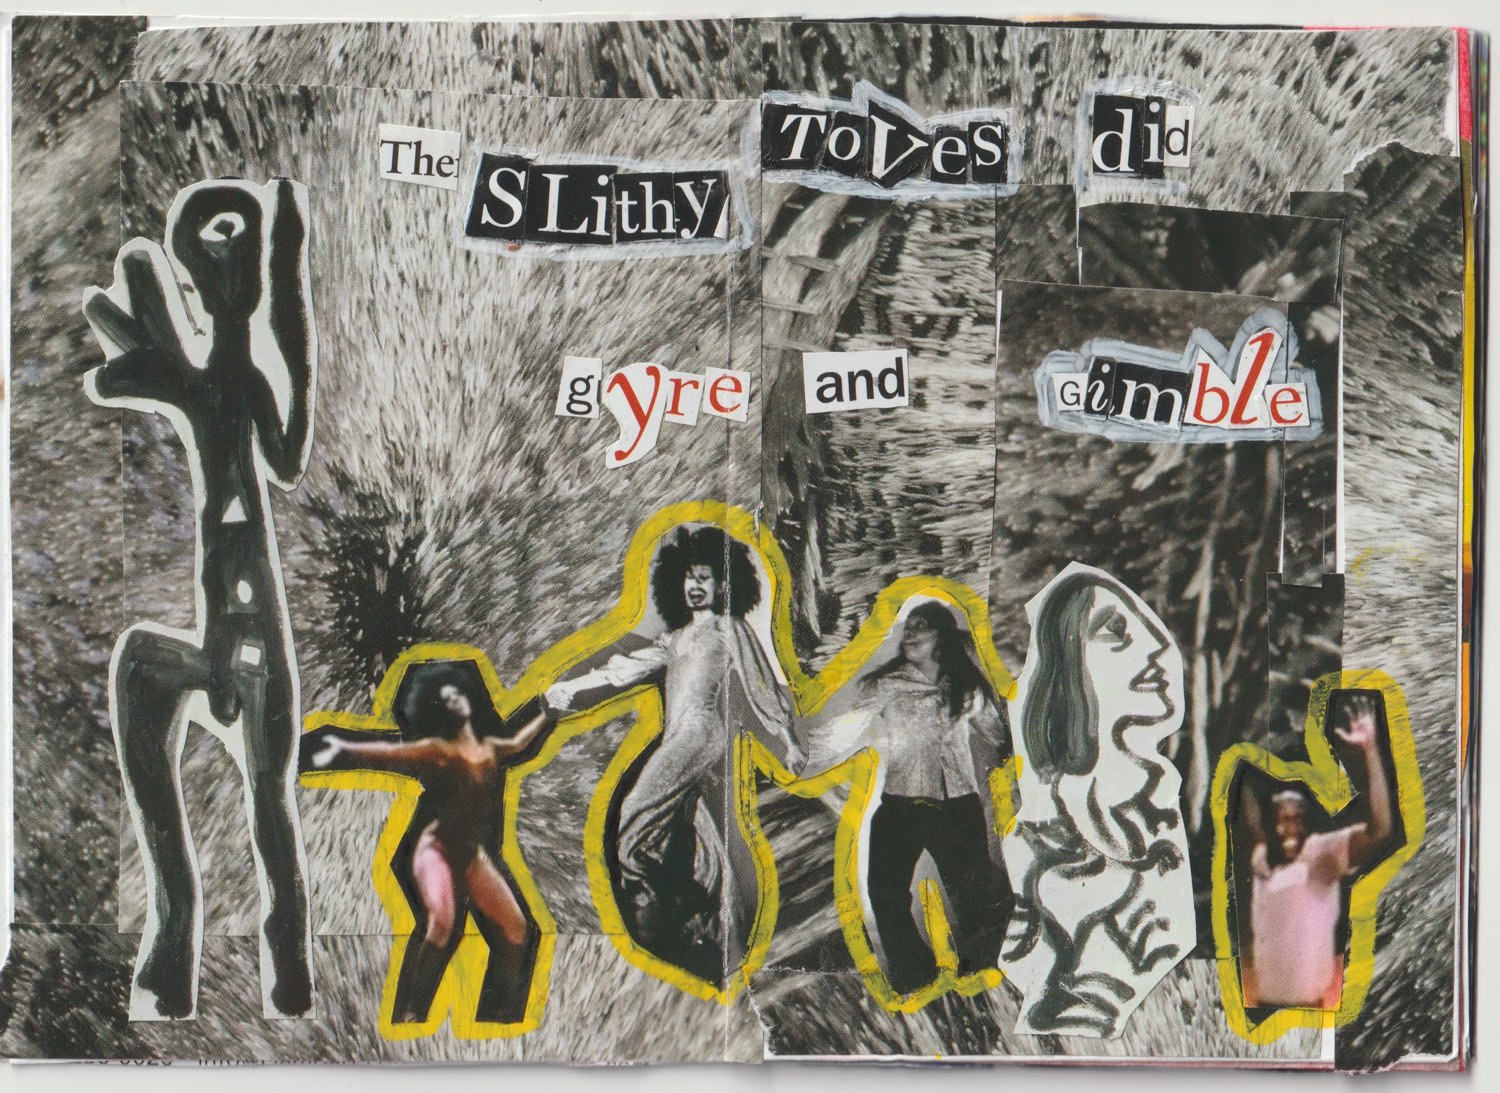 Interior of zine showing cut-out words and images with overpainting